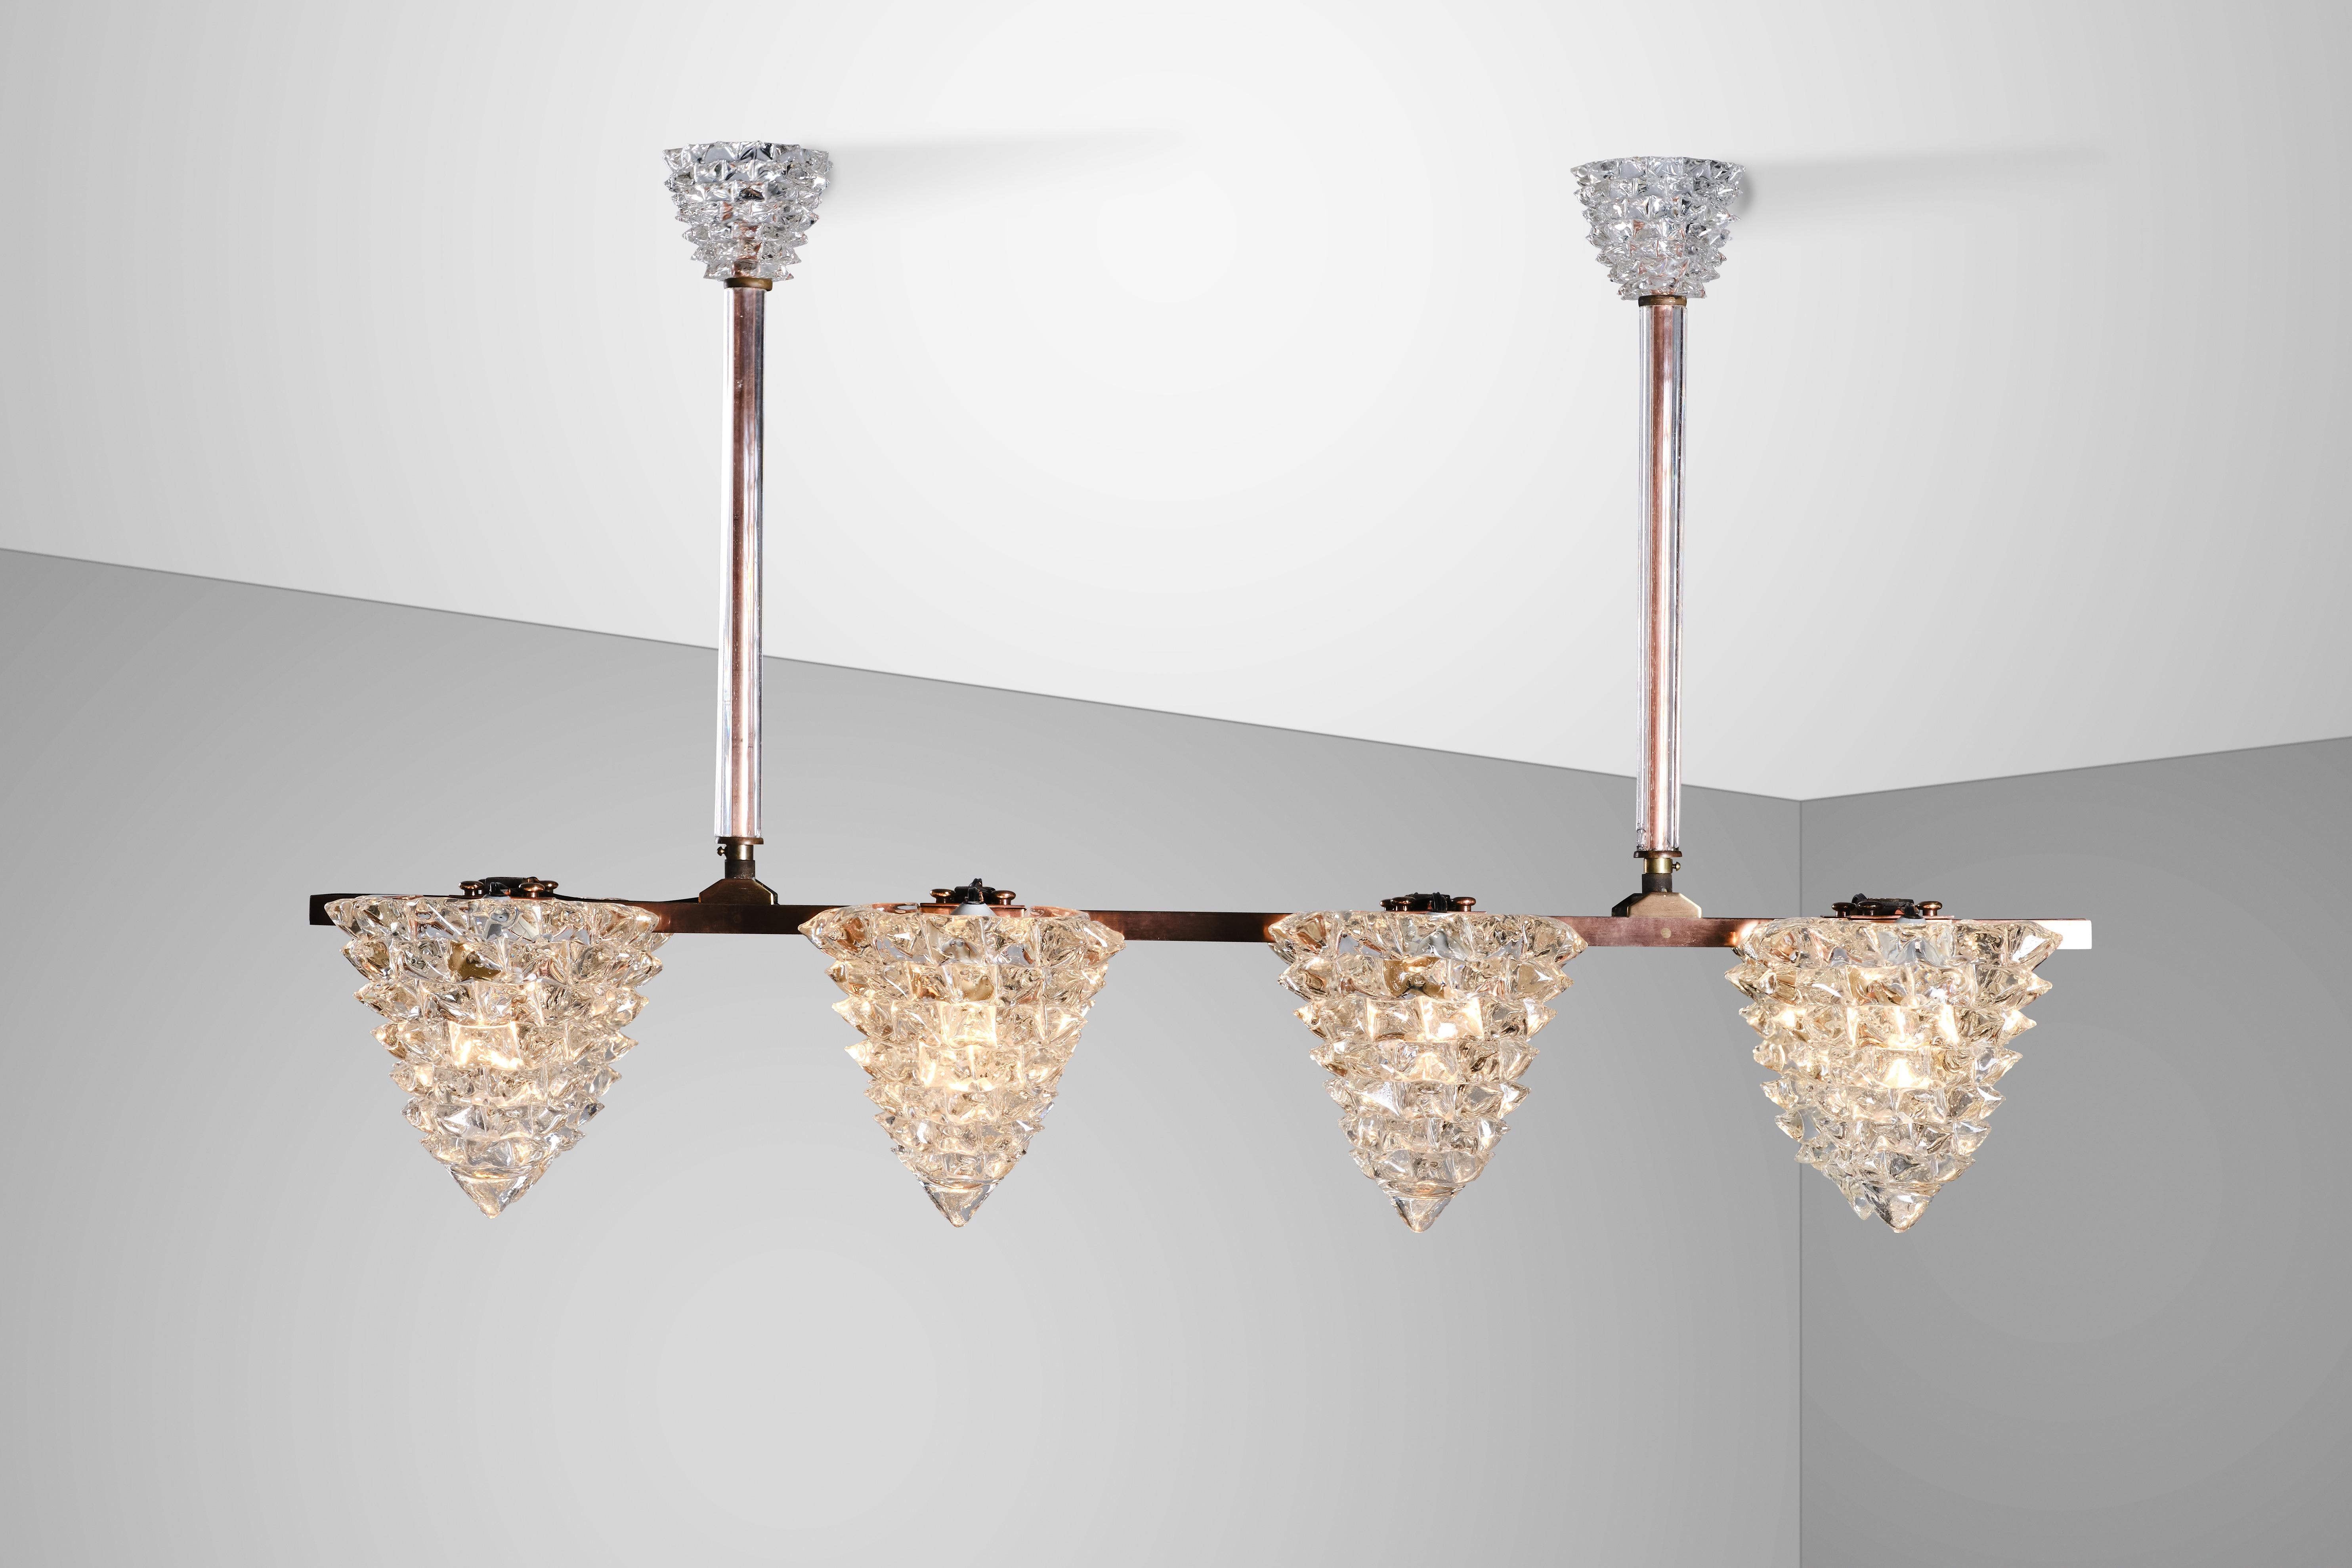 Manufactured in the 40s by Barovier&Toso, this ceiling lamp features 8 lights and a metallic structure wrapped in stunning blown Murano glass, while the light diffusers and the coverwires are in rostrated Murano gless
This is a truly unique piece